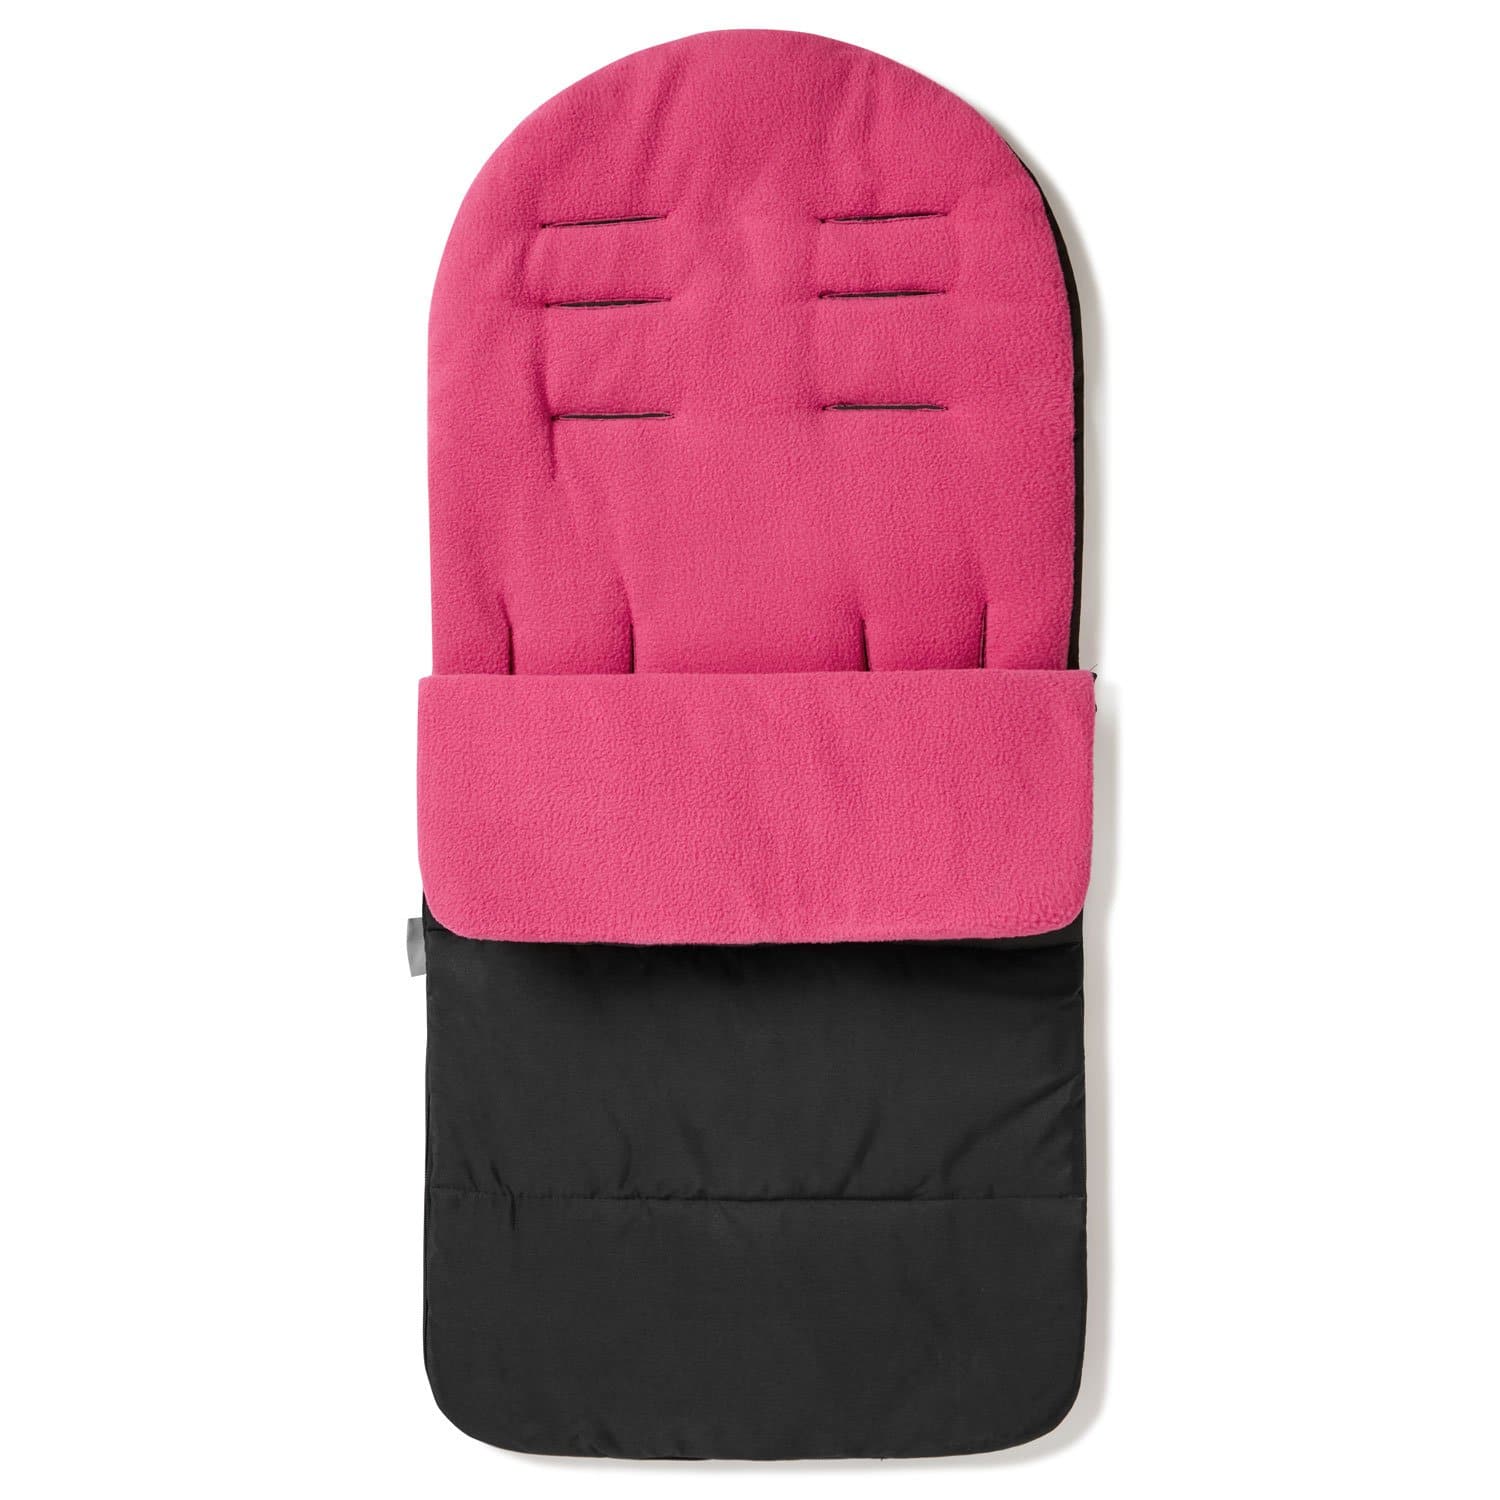 Premium Footmuff / Cosy Toes Compatible with Inglesina - Pink Rose / Fits All Models | For Your Little One